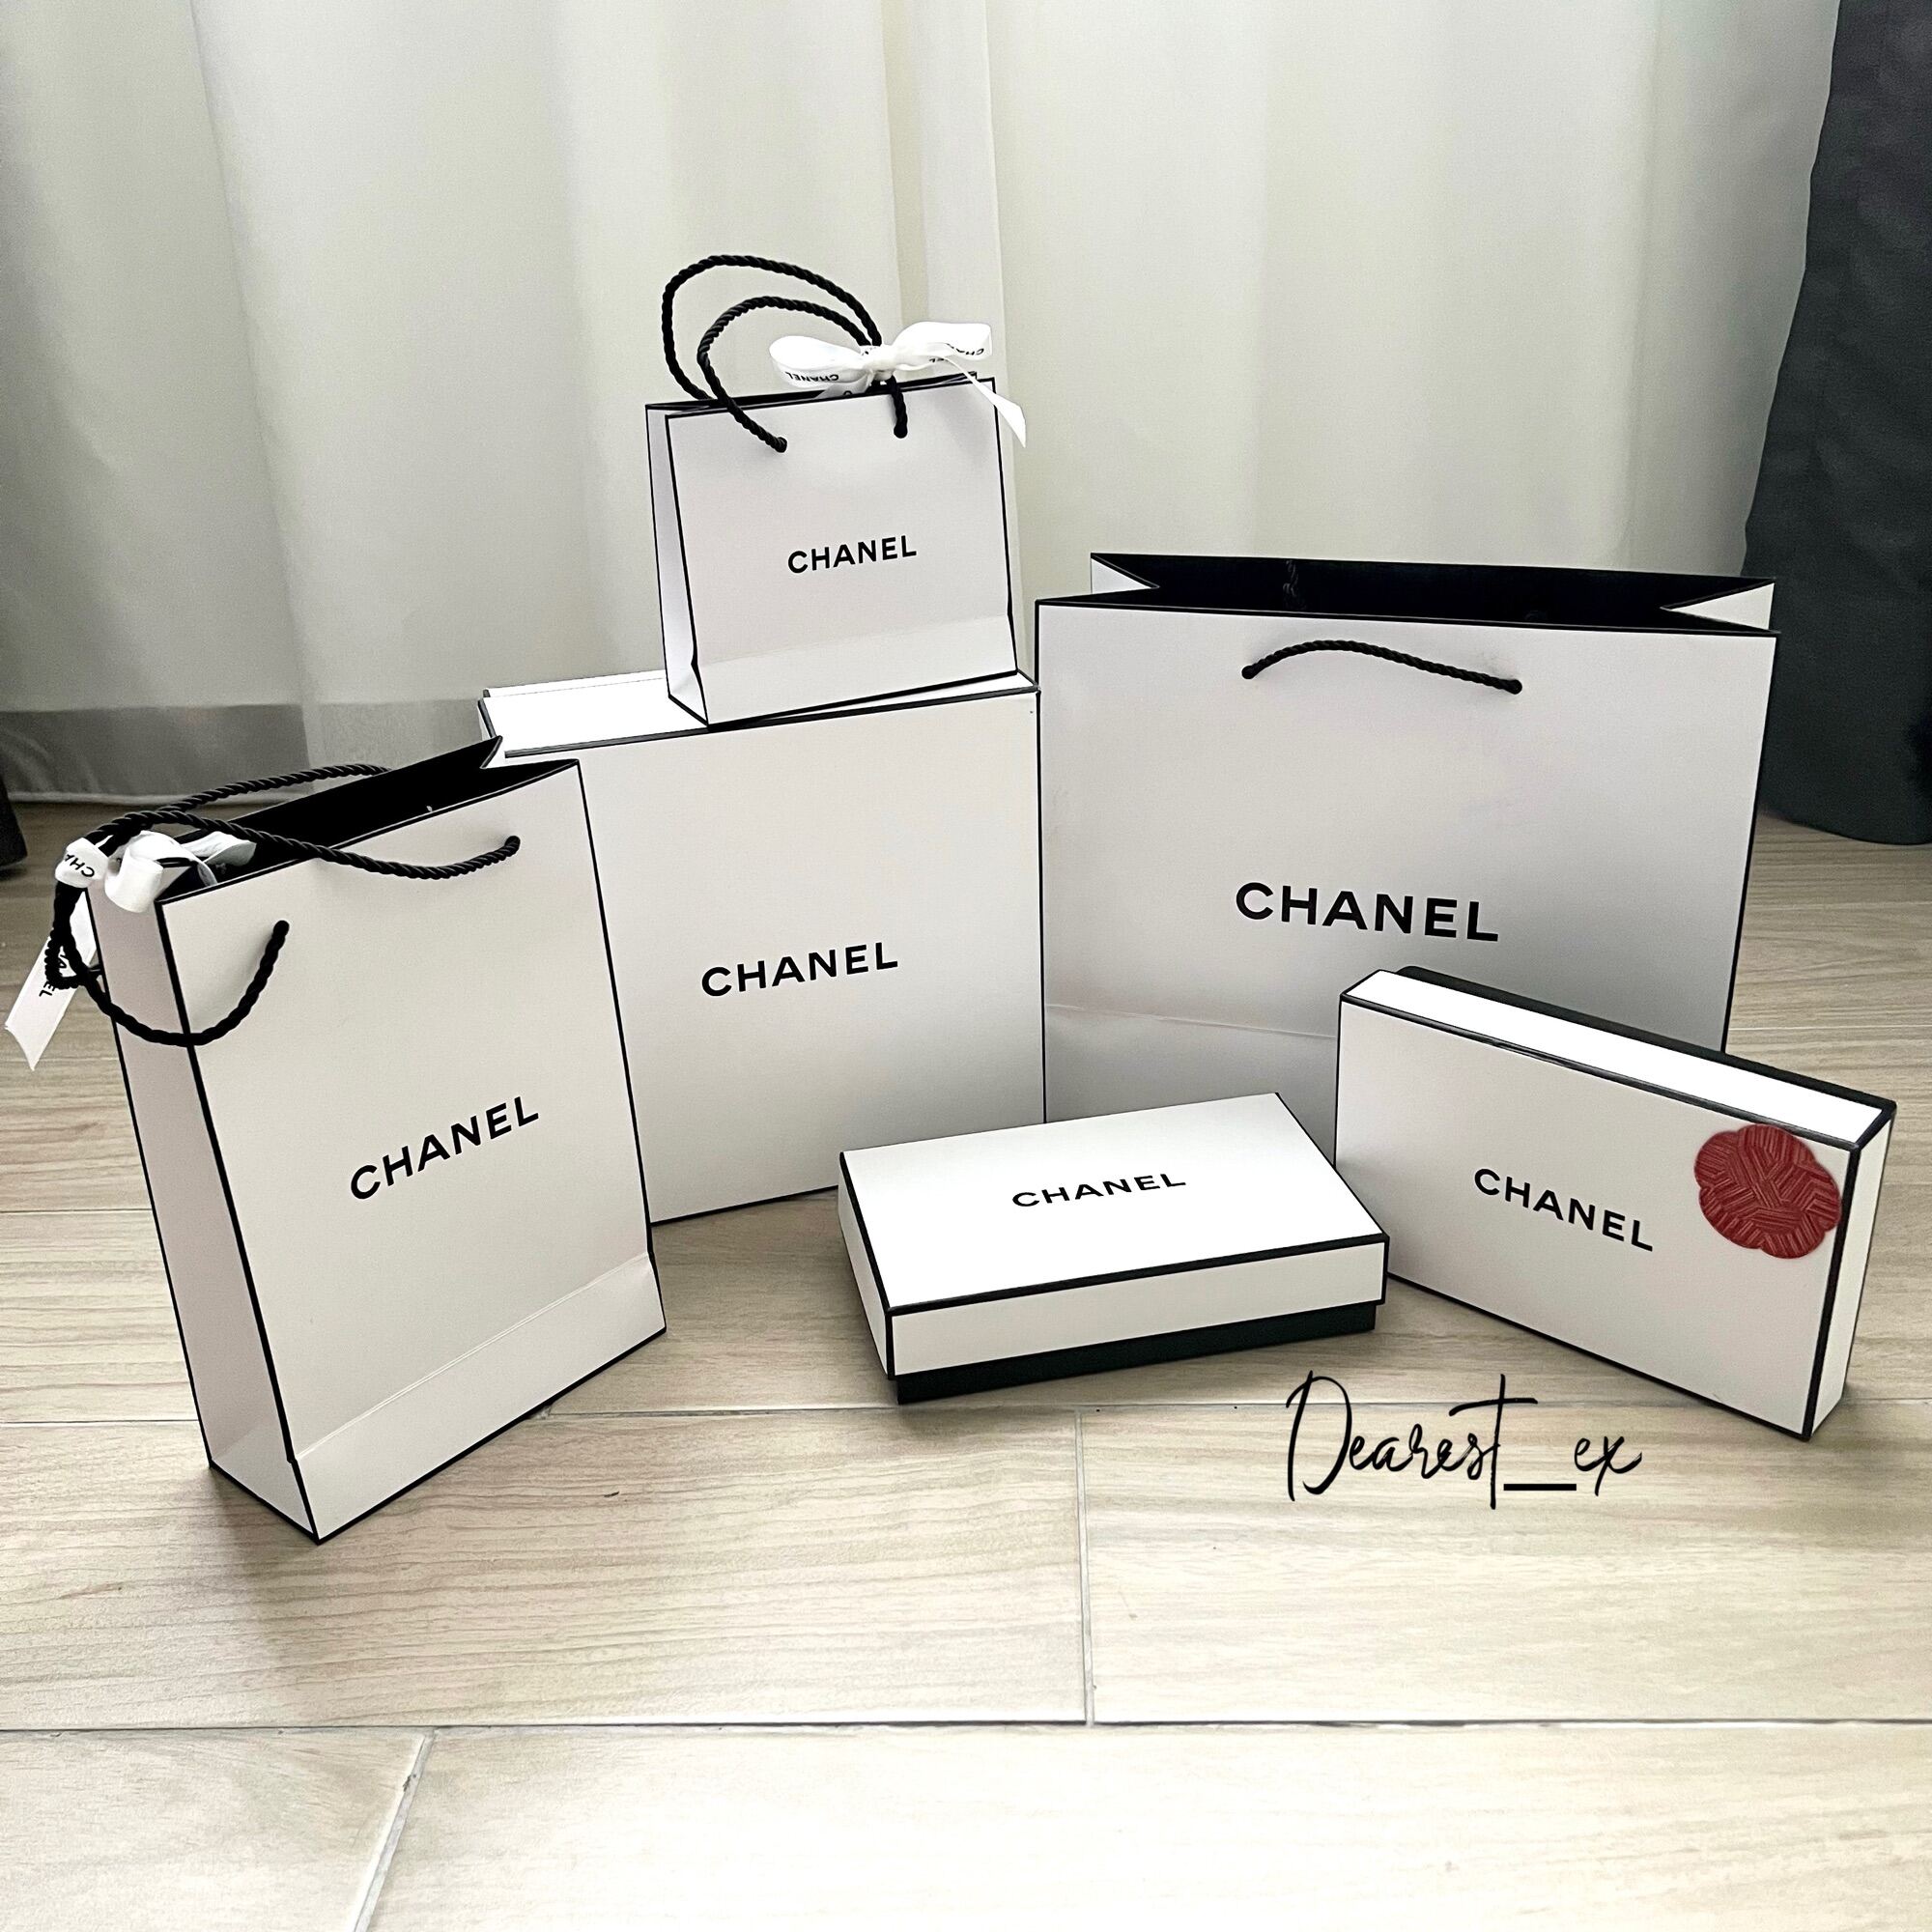 TikTokers Are Buying the Cheapest Thing at Chanel for the Luxe Packaging   Free Samples